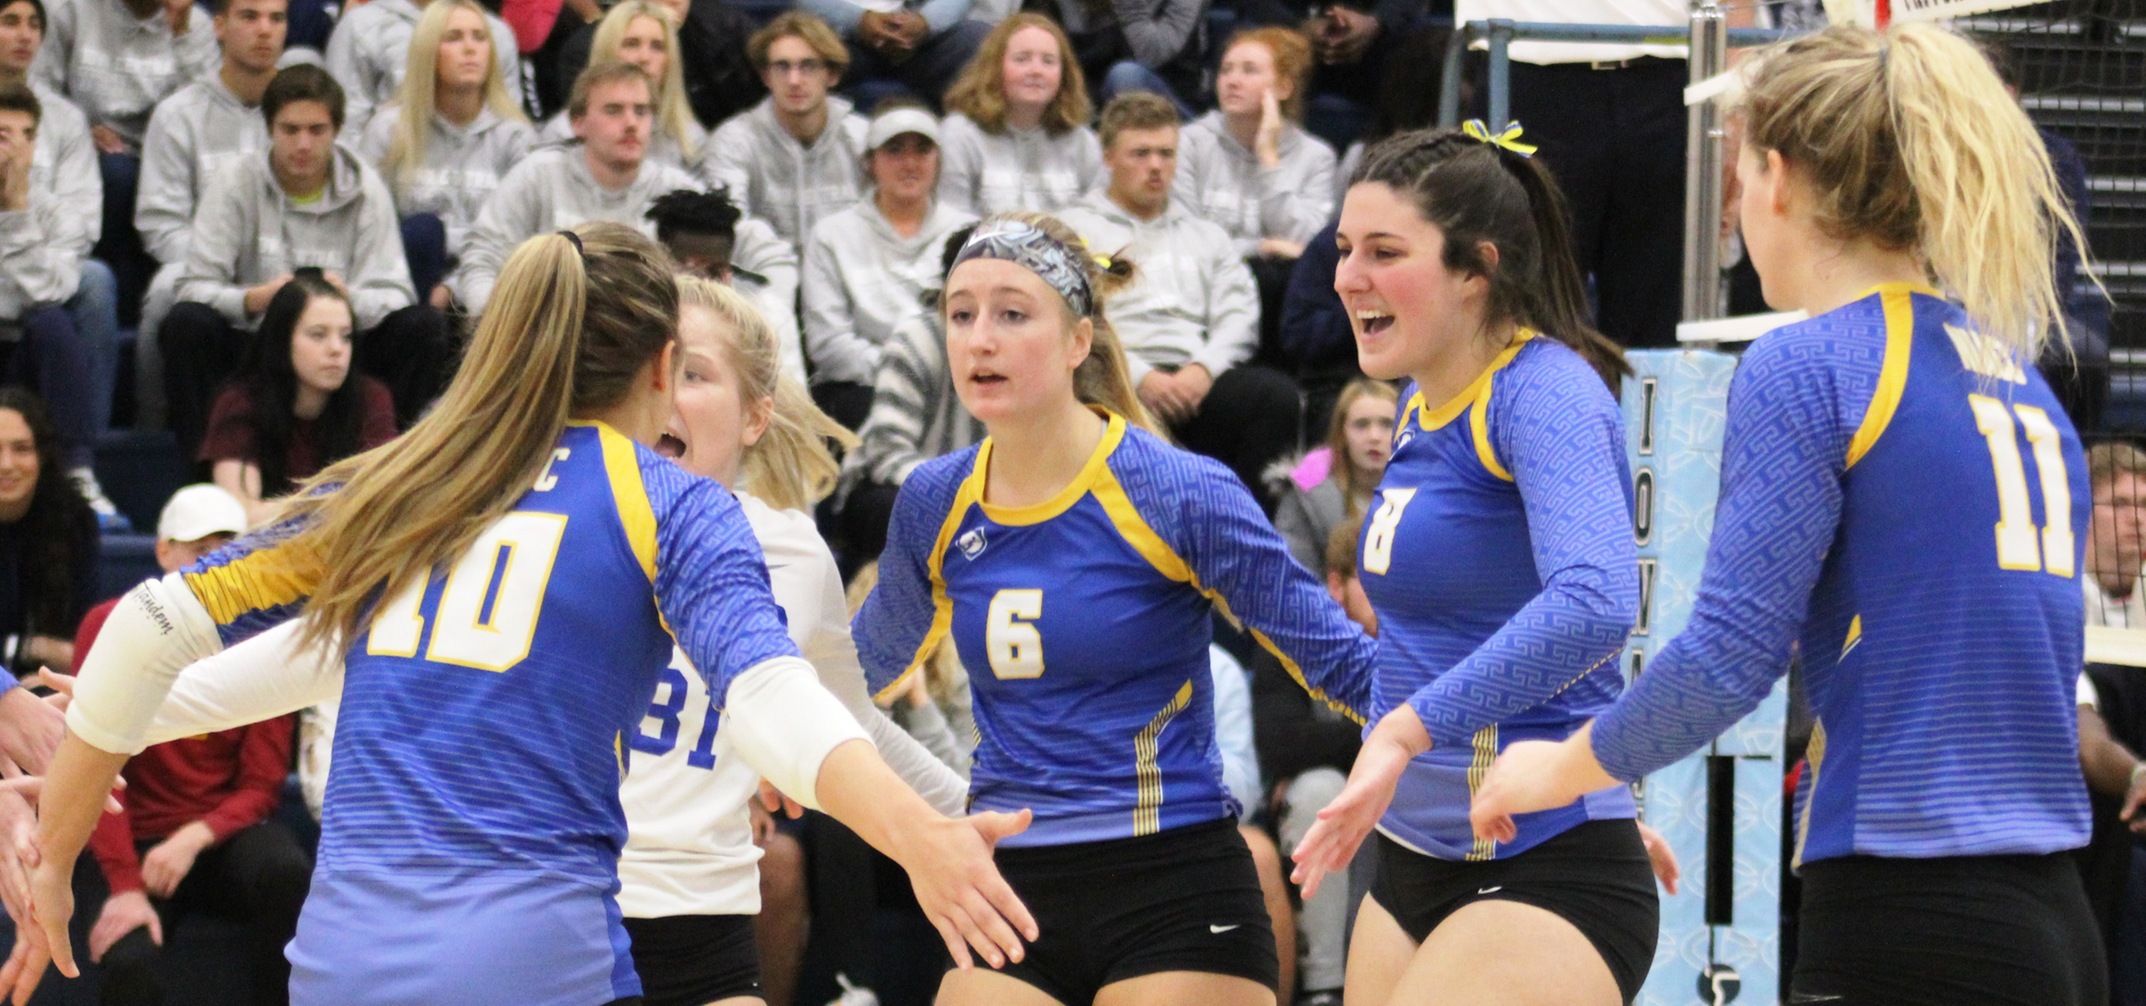 NIACC celebrates a point in Wednesday's match at Iowa Central.